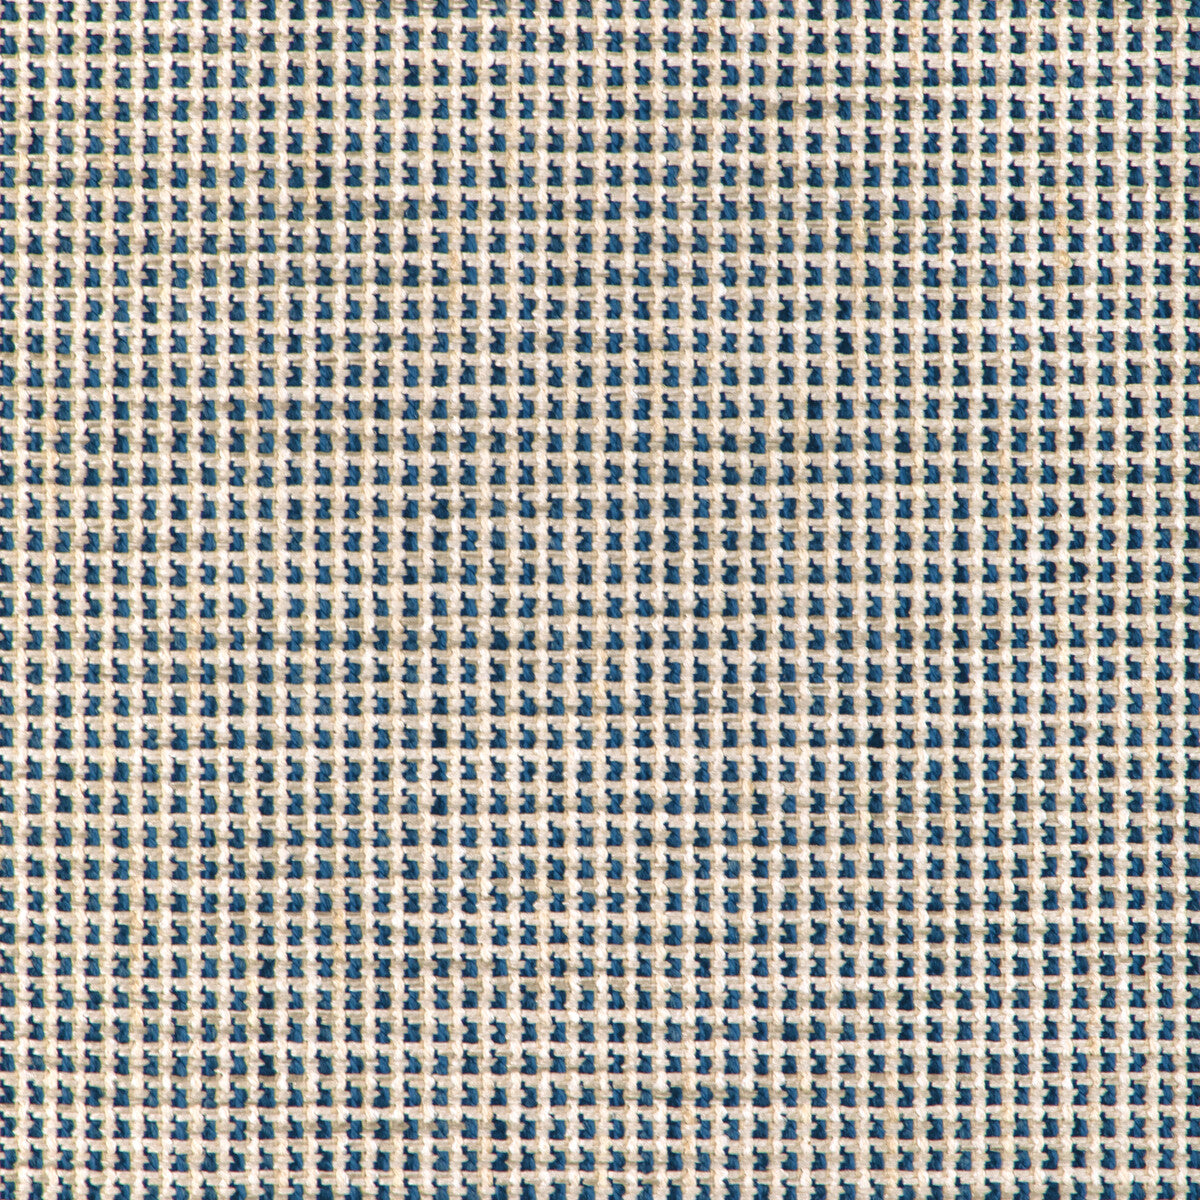 Kravet Design fabric in 37234-5 color - pattern 37234.5.0 - by Kravet Design in the Woven Colors collection